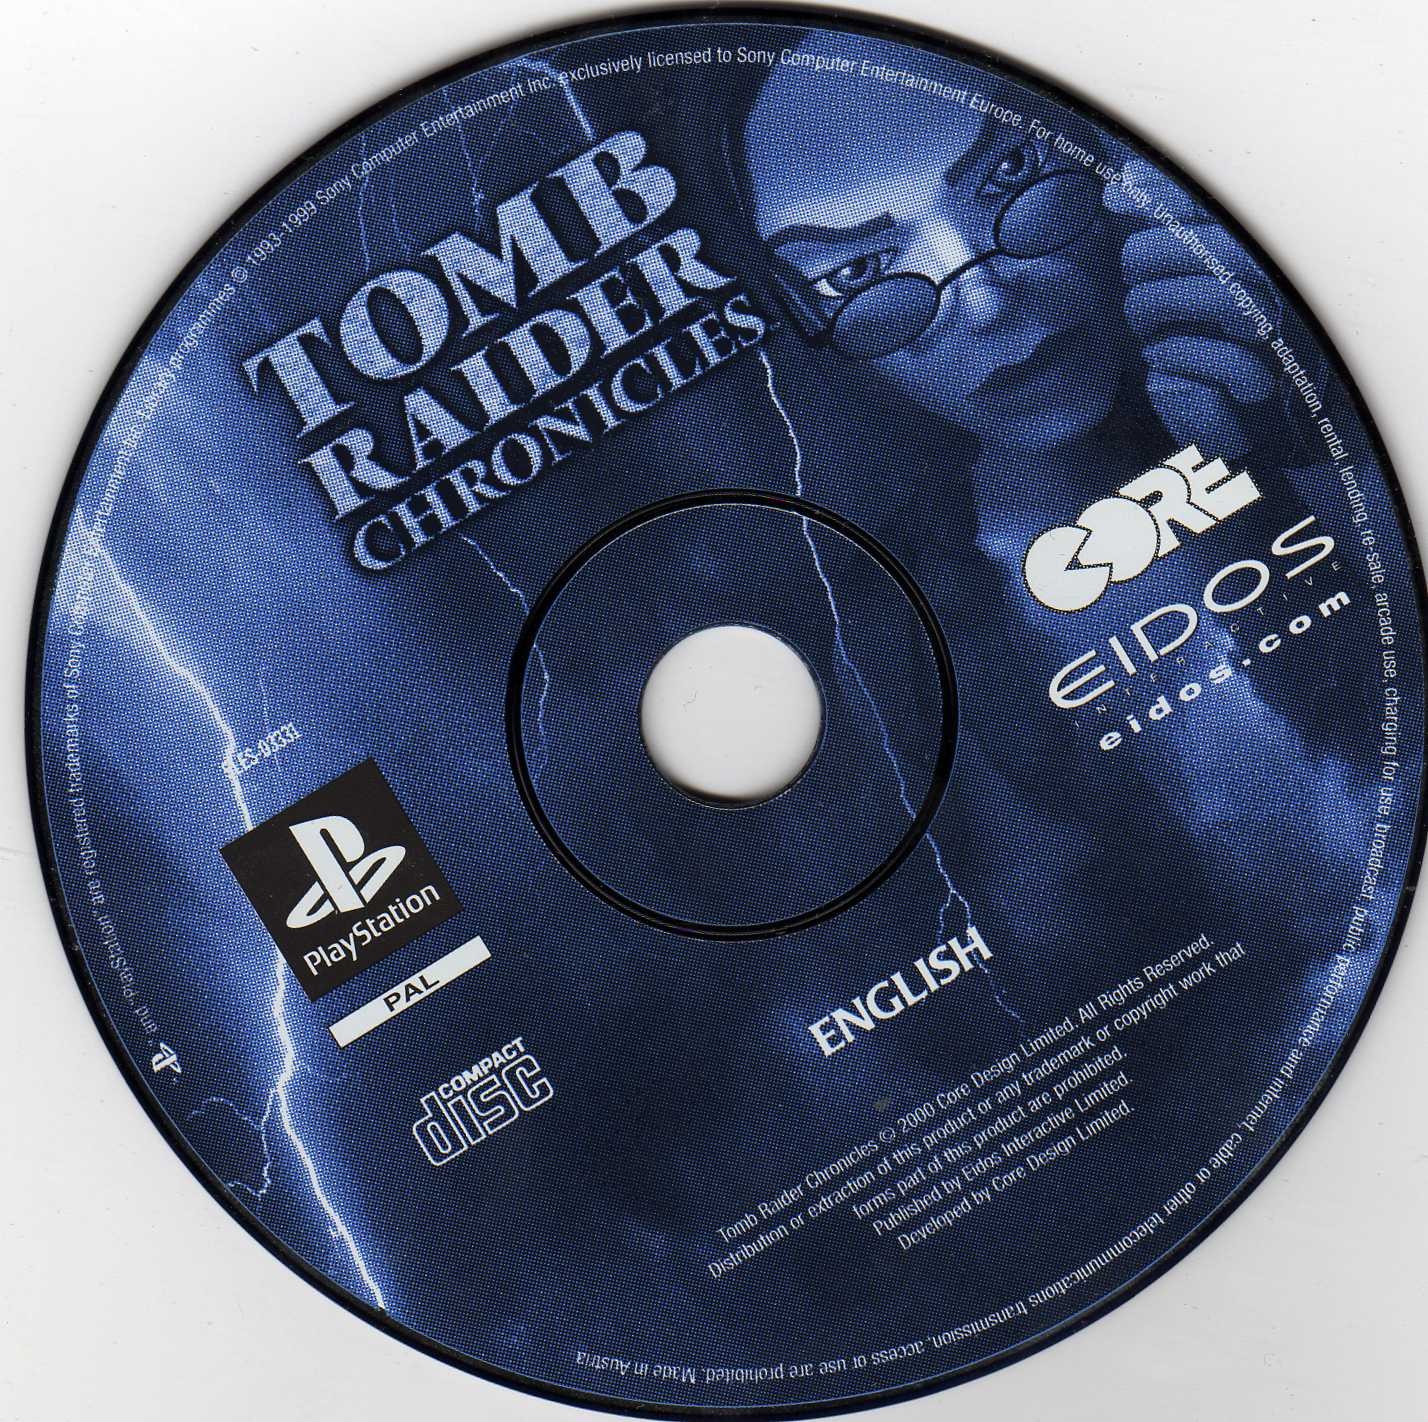 Tomb Raider Chronicles PSX cover